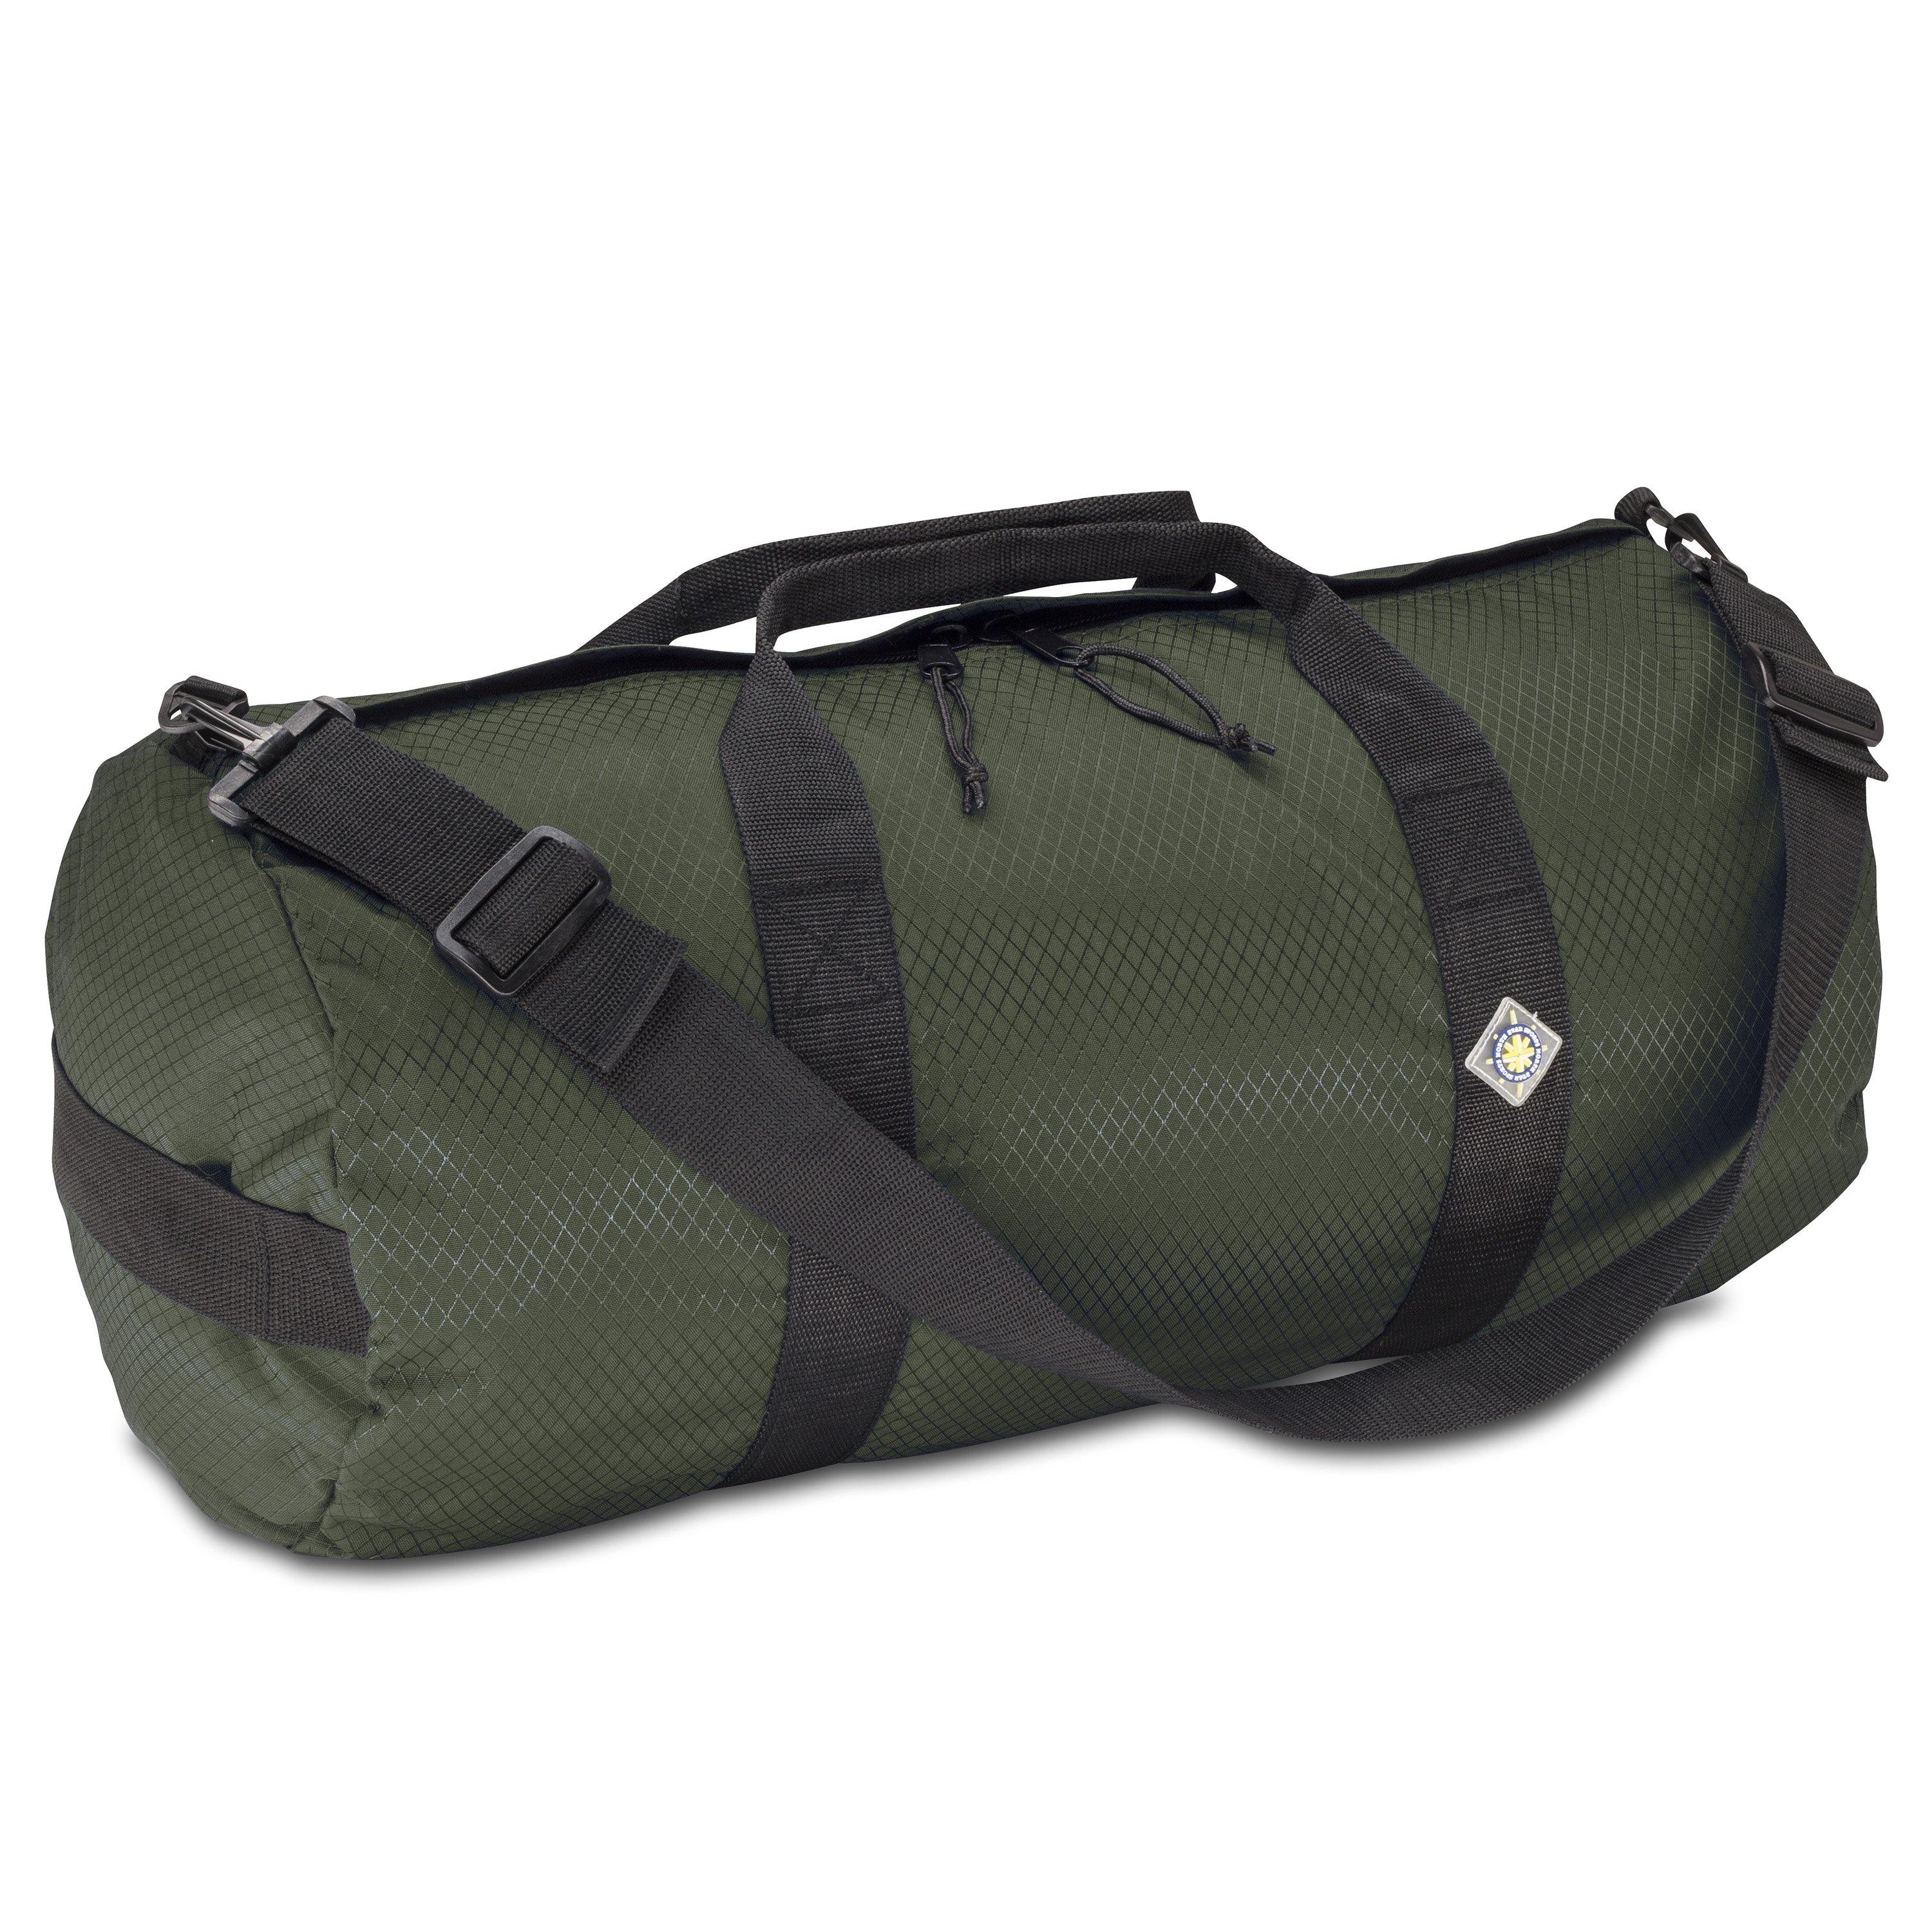 Studio photo the Forestry Green SD1224DLX Standard Duffle by Northstar Bags. 44 liter duffel with diamond ripstop fabric, thick webbing straps, and a large format metal zipper. Guaranteed for life.